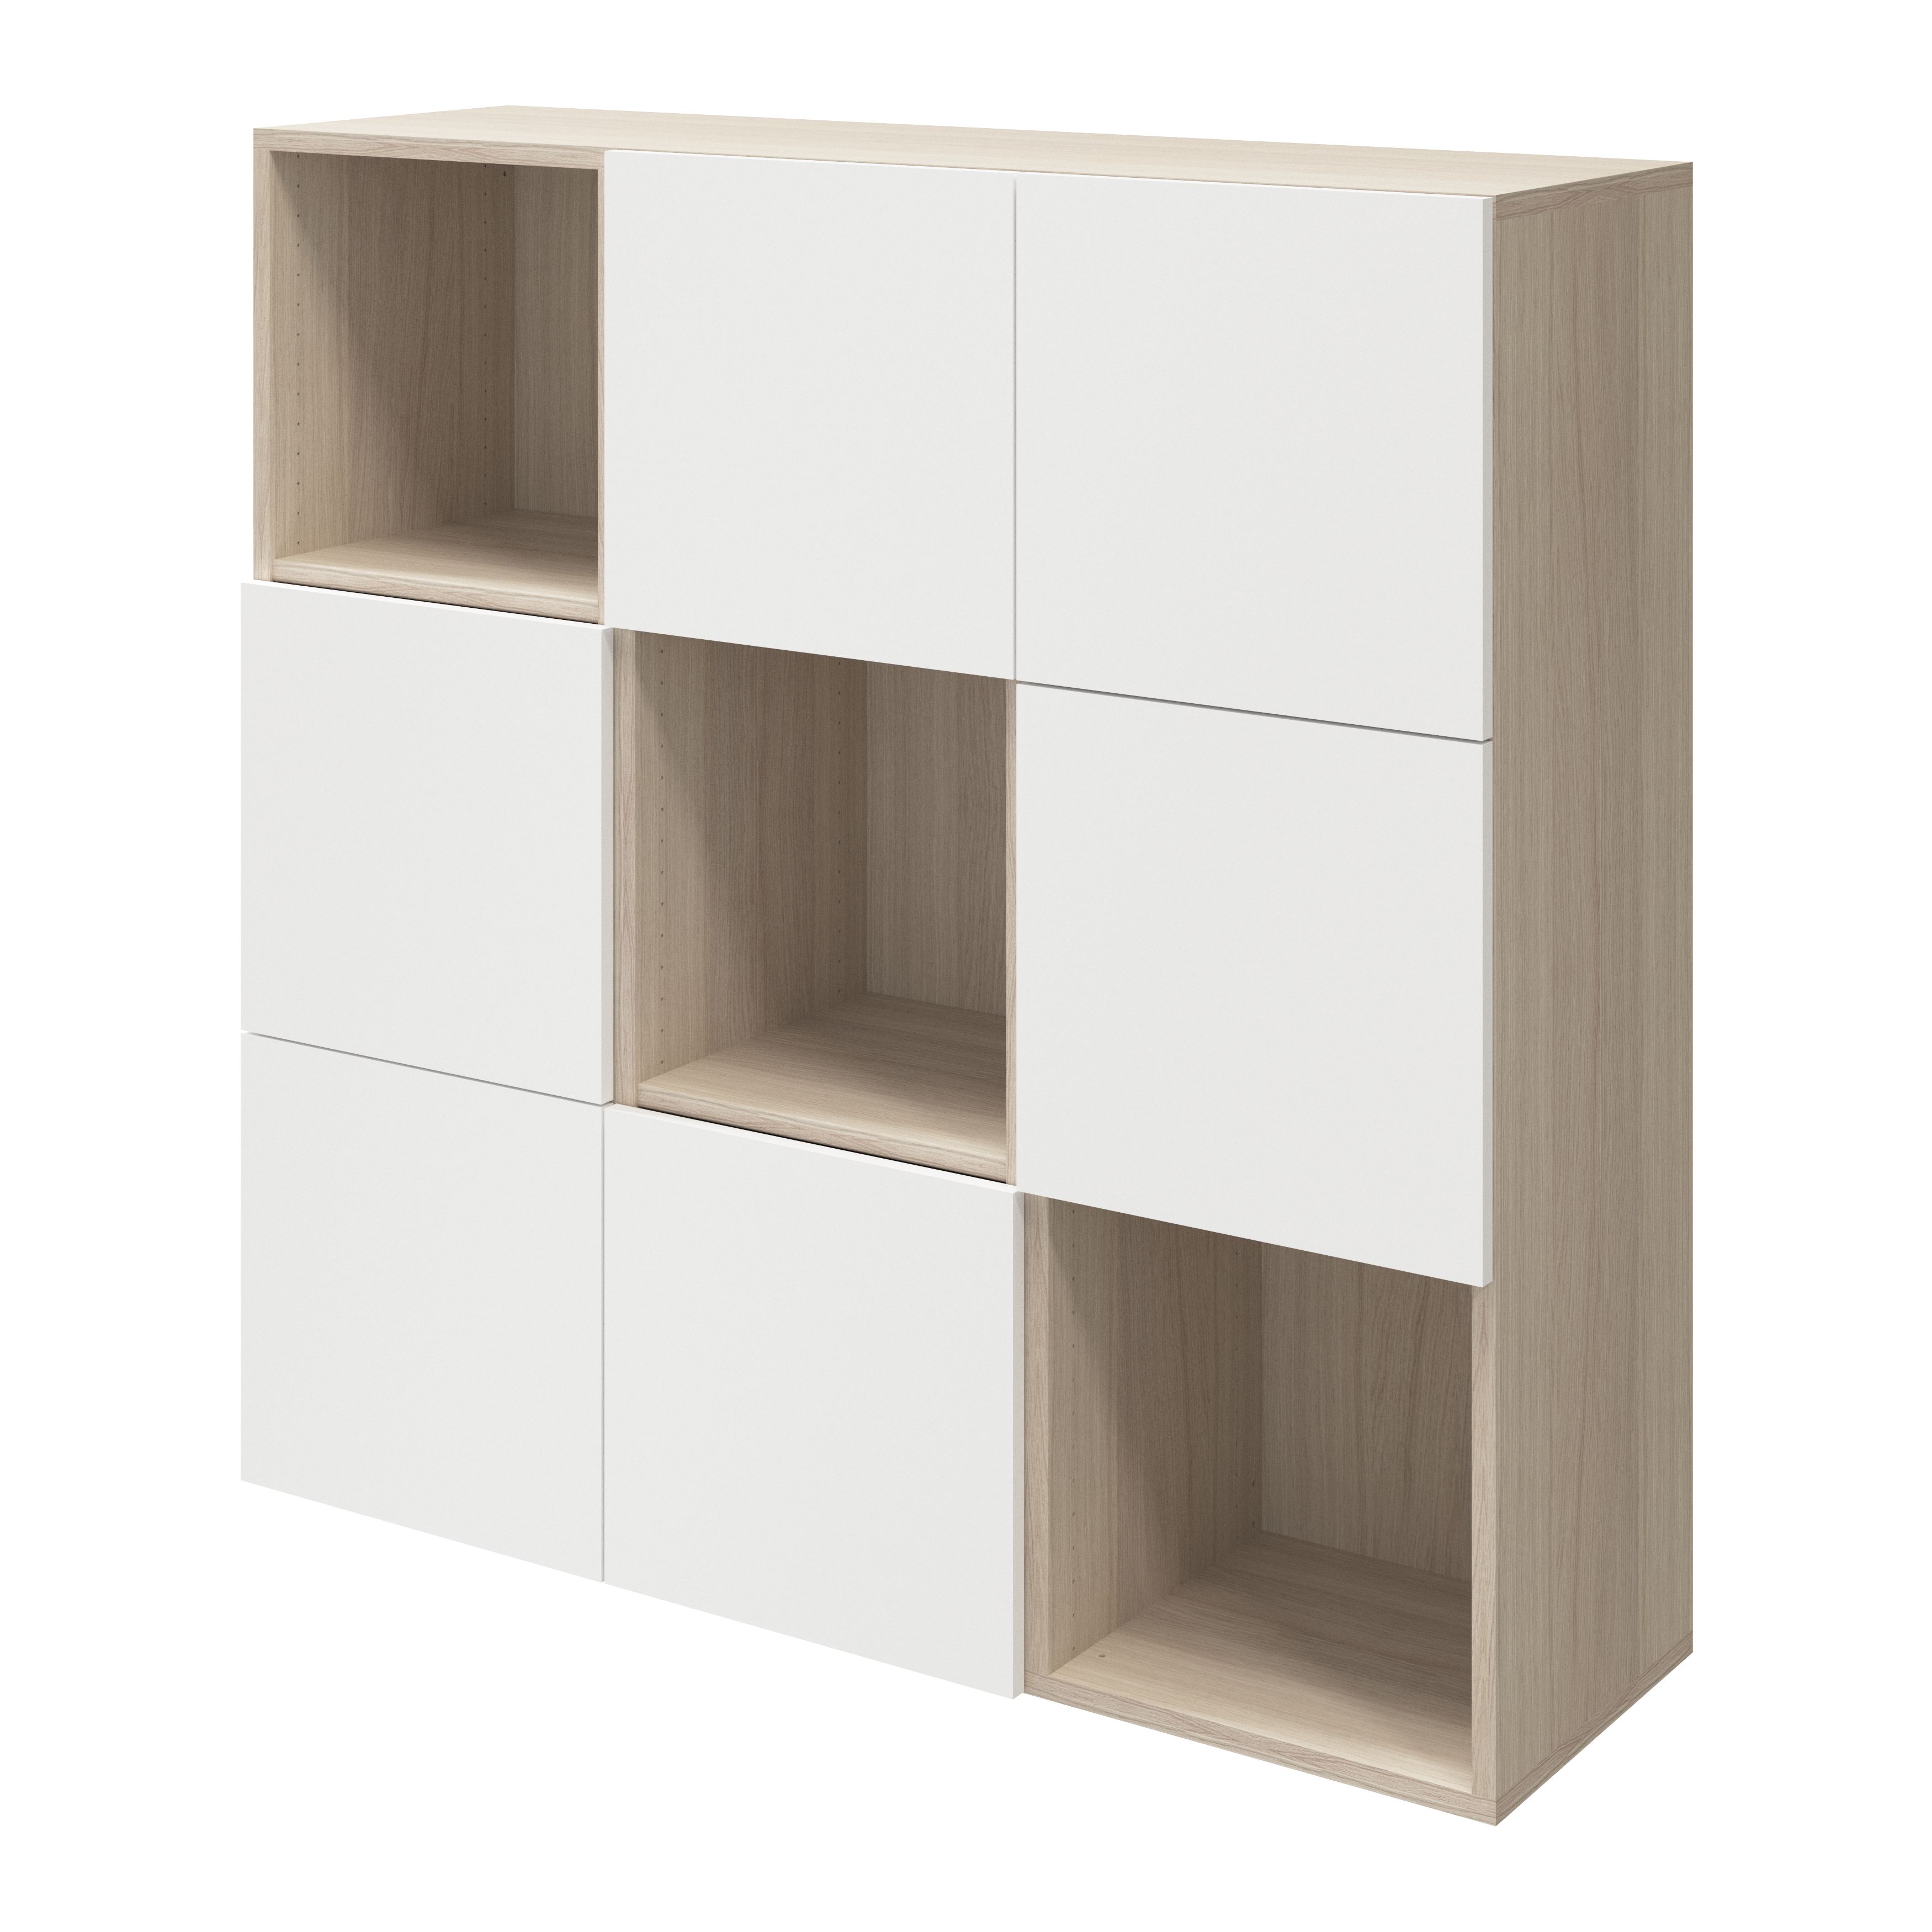 GoodHome Atomia Freestanding White Oak effect Small Bookcases, shelving units & display cabinets (H)1125mm